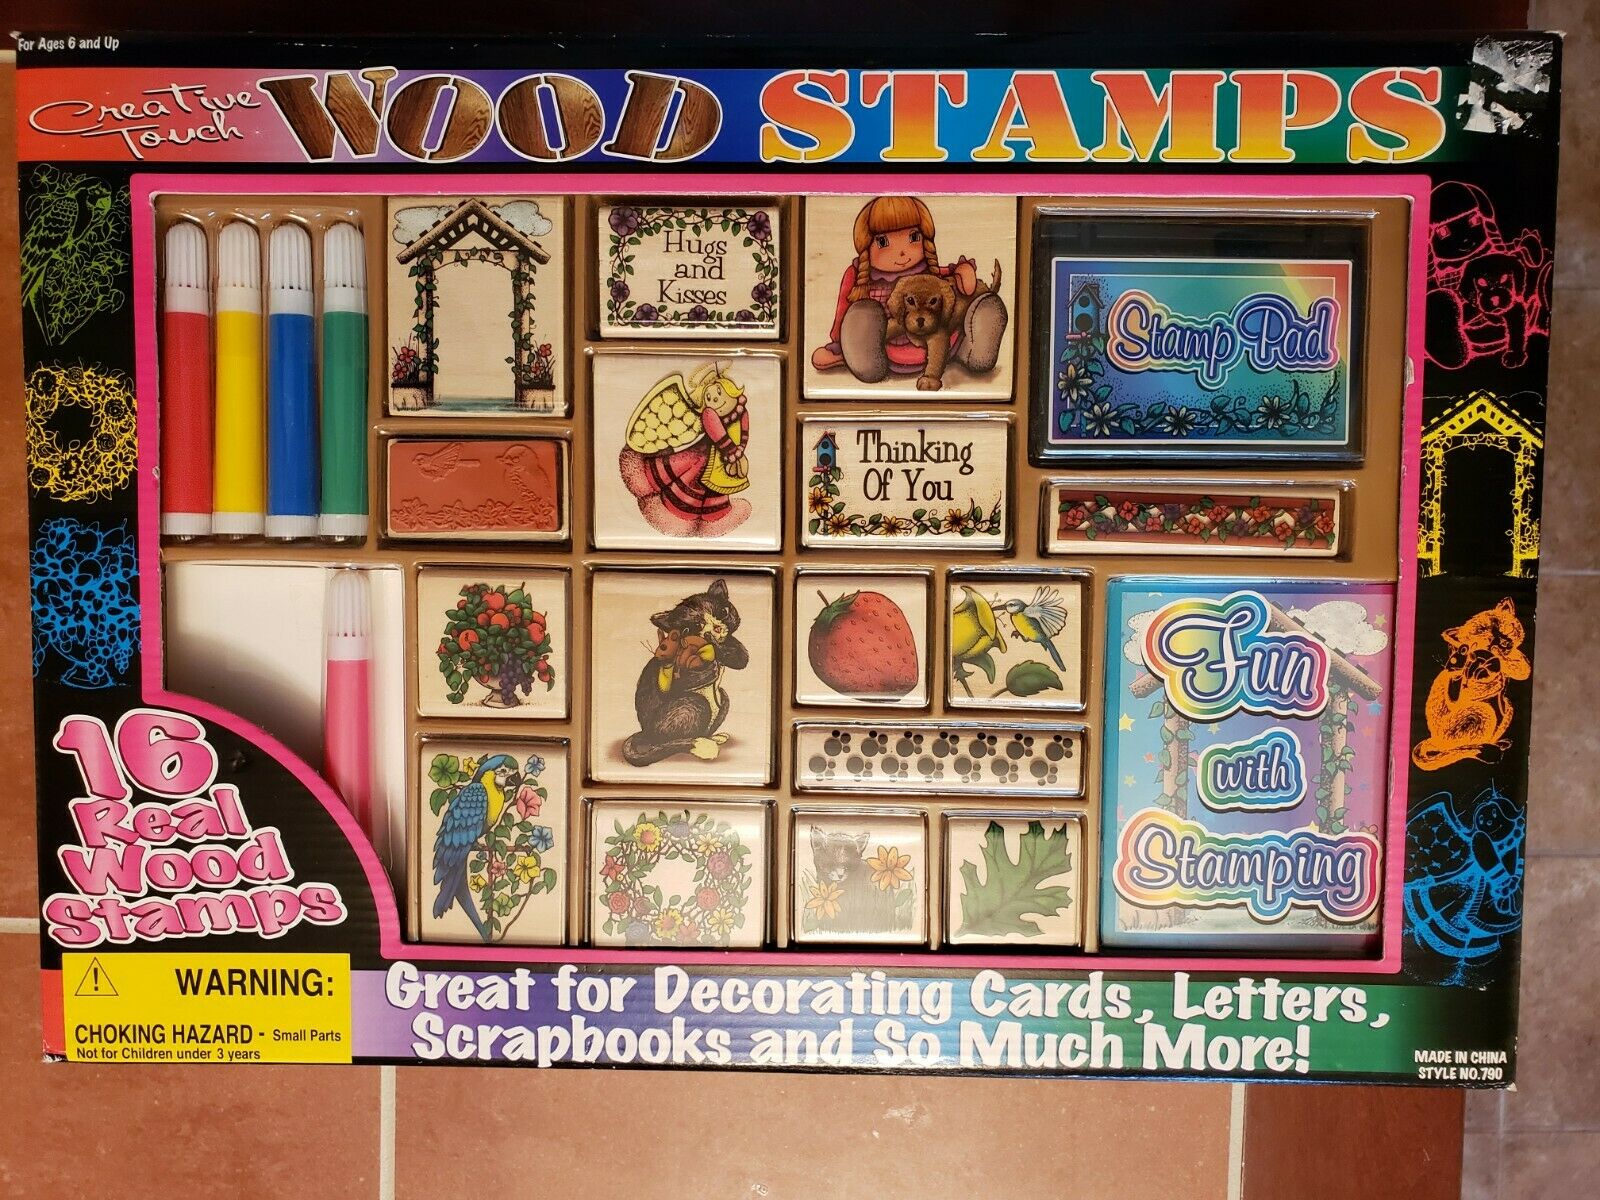 16 Real Wood Stamps New Creative Touch1999 Angel Cats Birds Paw Prints Doll Dog